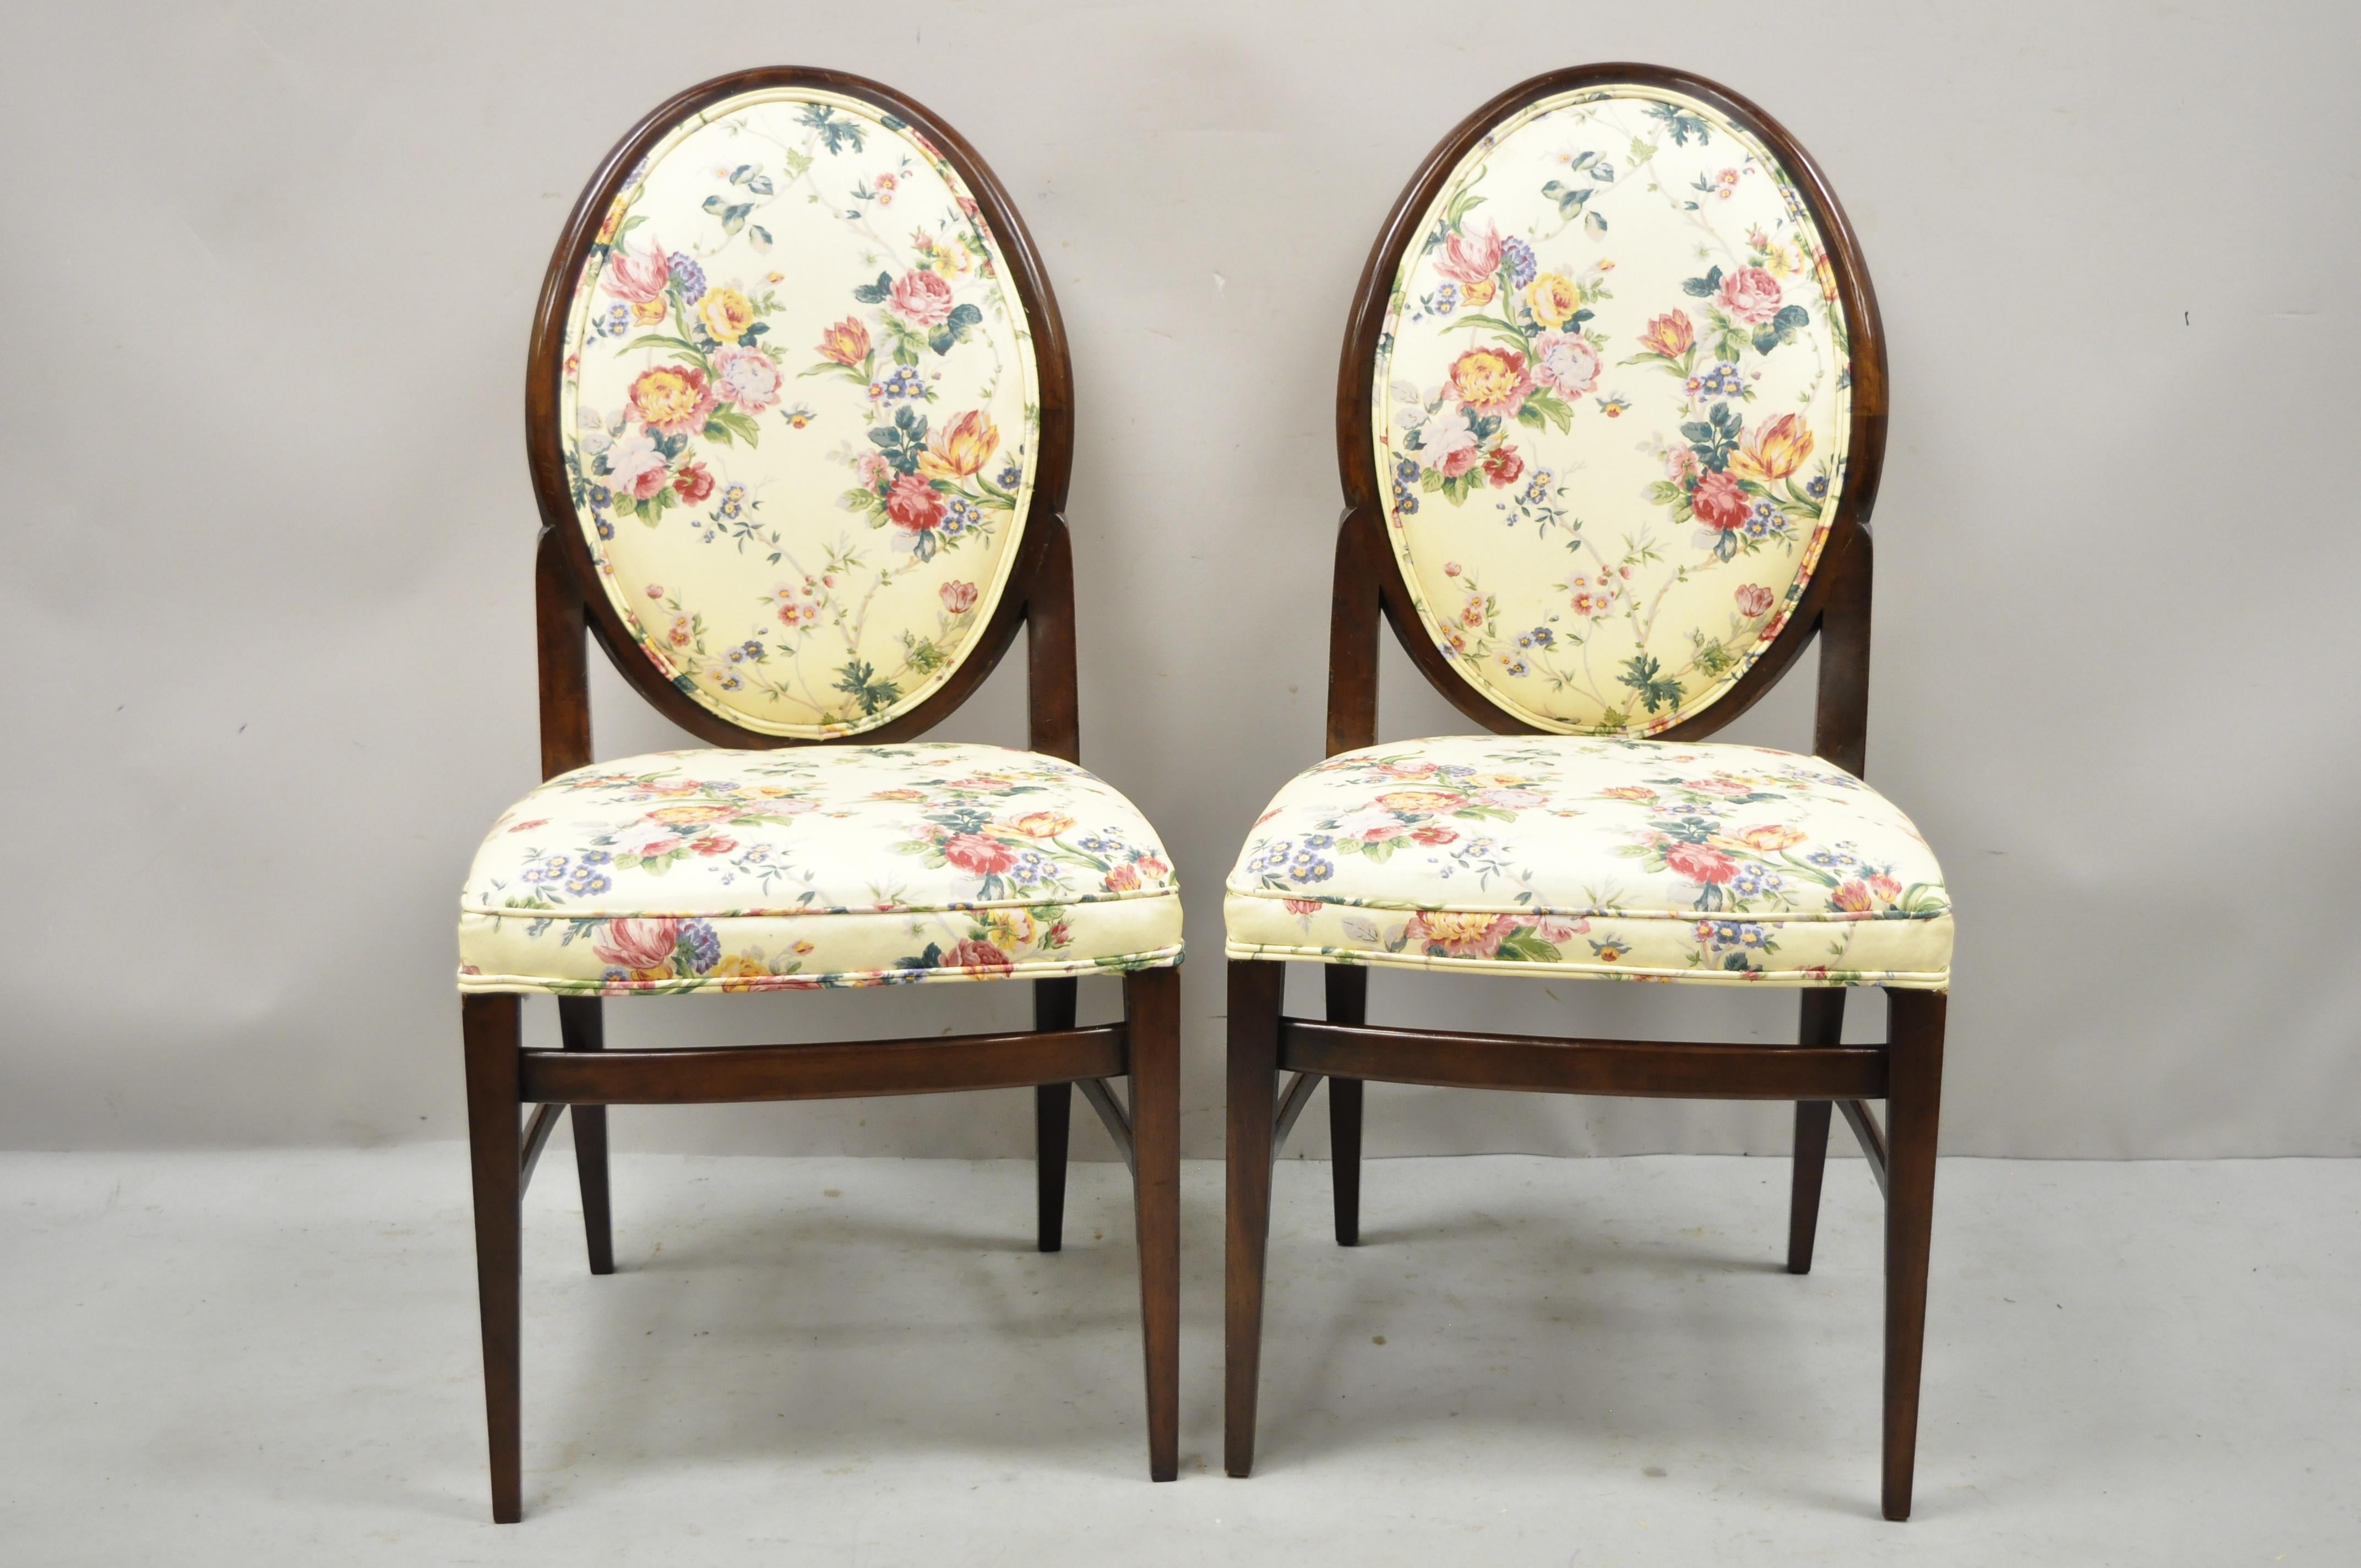 French Art Deco oval upholstered back mahogany wood frame dining chairs - a pair. Item features oval upholstered backs, solid wood frames, tapered legs, very nice vintage pair, clean modernist lines, great style and form. Circa mid 20th century.